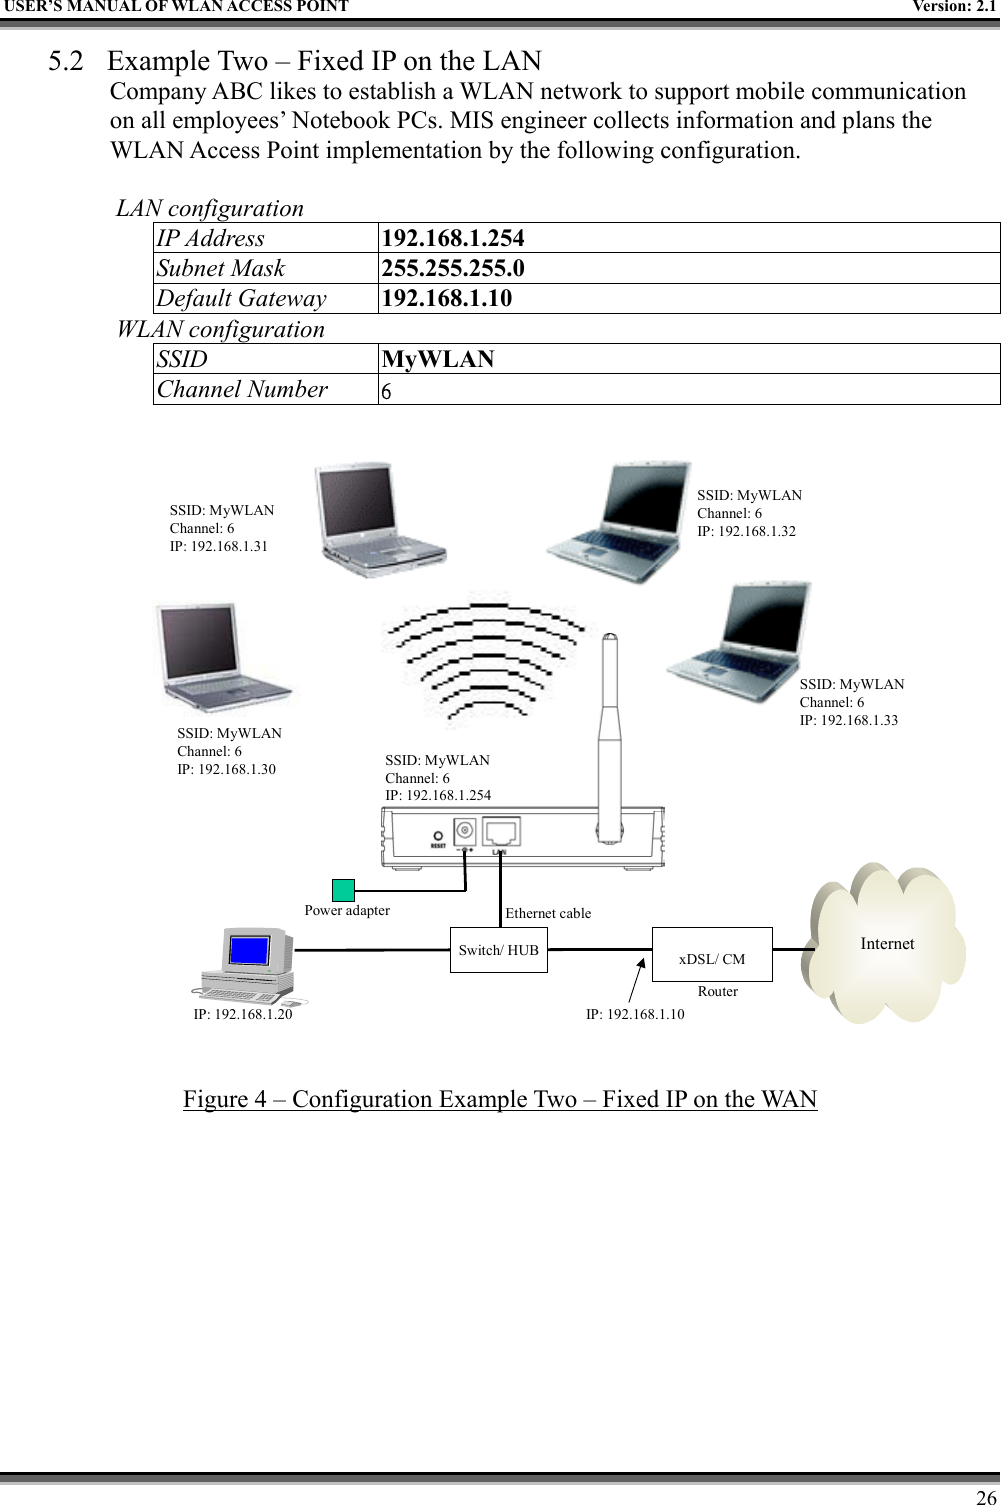   USER’S MANUAL OF WLAN ACCESS POINT    Version: 2.1     26 5.2  Example Two – Fixed IP on the LAN Company ABC likes to establish a WLAN network to support mobile communication on all employees’ Notebook PCs. MIS engineer collects information and plans the WLAN Access Point implementation by the following configuration.  LAN configuration IP Address  192.168.1.254 Subnet Mask  255.255.255.0 Default Gateway  192.168.1.10 WLAN configuration SSID  MyWLAN Channel Number  6 InternetxDSL/ CMPower adapter Ethernet cableSSID: MyWLANChannel: 6 IP: 192.168.1.33SSID: MyWLANChannel: 6 IP: 192.168.1.32SSID: MyWLANChannel: 6 IP: 192.168.1.31SSID: MyWLANChannel: 6 IP: 192.168.1.30 SSID: MyWLANChannel: 6IP: 192.168.1.254IP: 192.168.1.20Switch/ HUBRouterIP: 192.168.1.10 Figure 4 – Configuration Example Two – Fixed IP on the WAN  